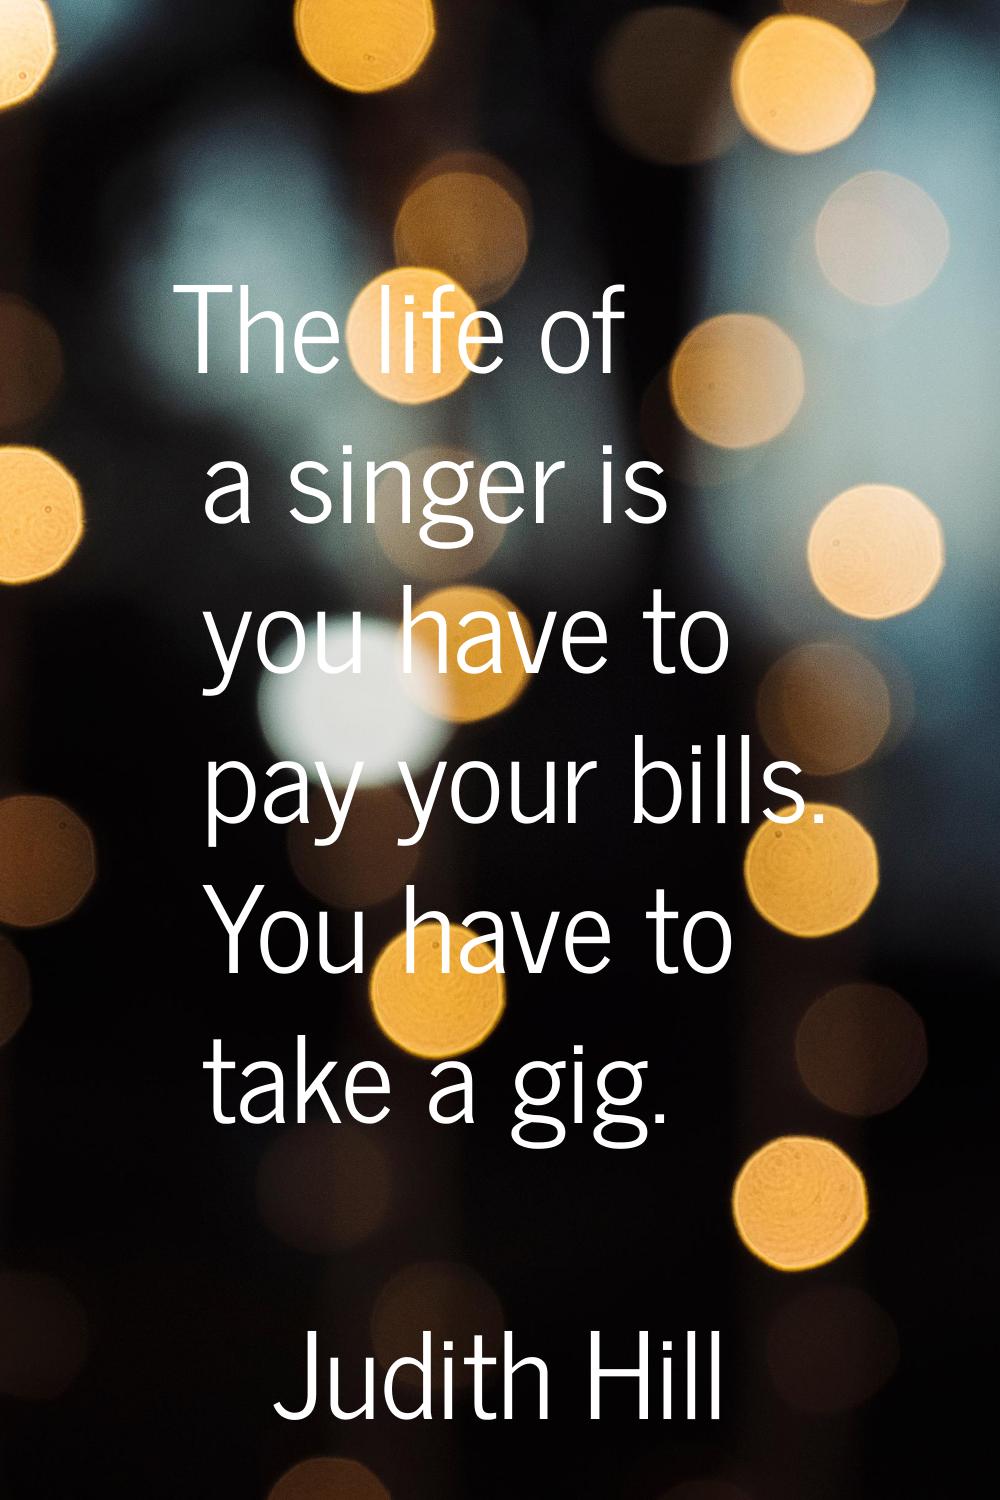 The life of a singer is you have to pay your bills. You have to take a gig.